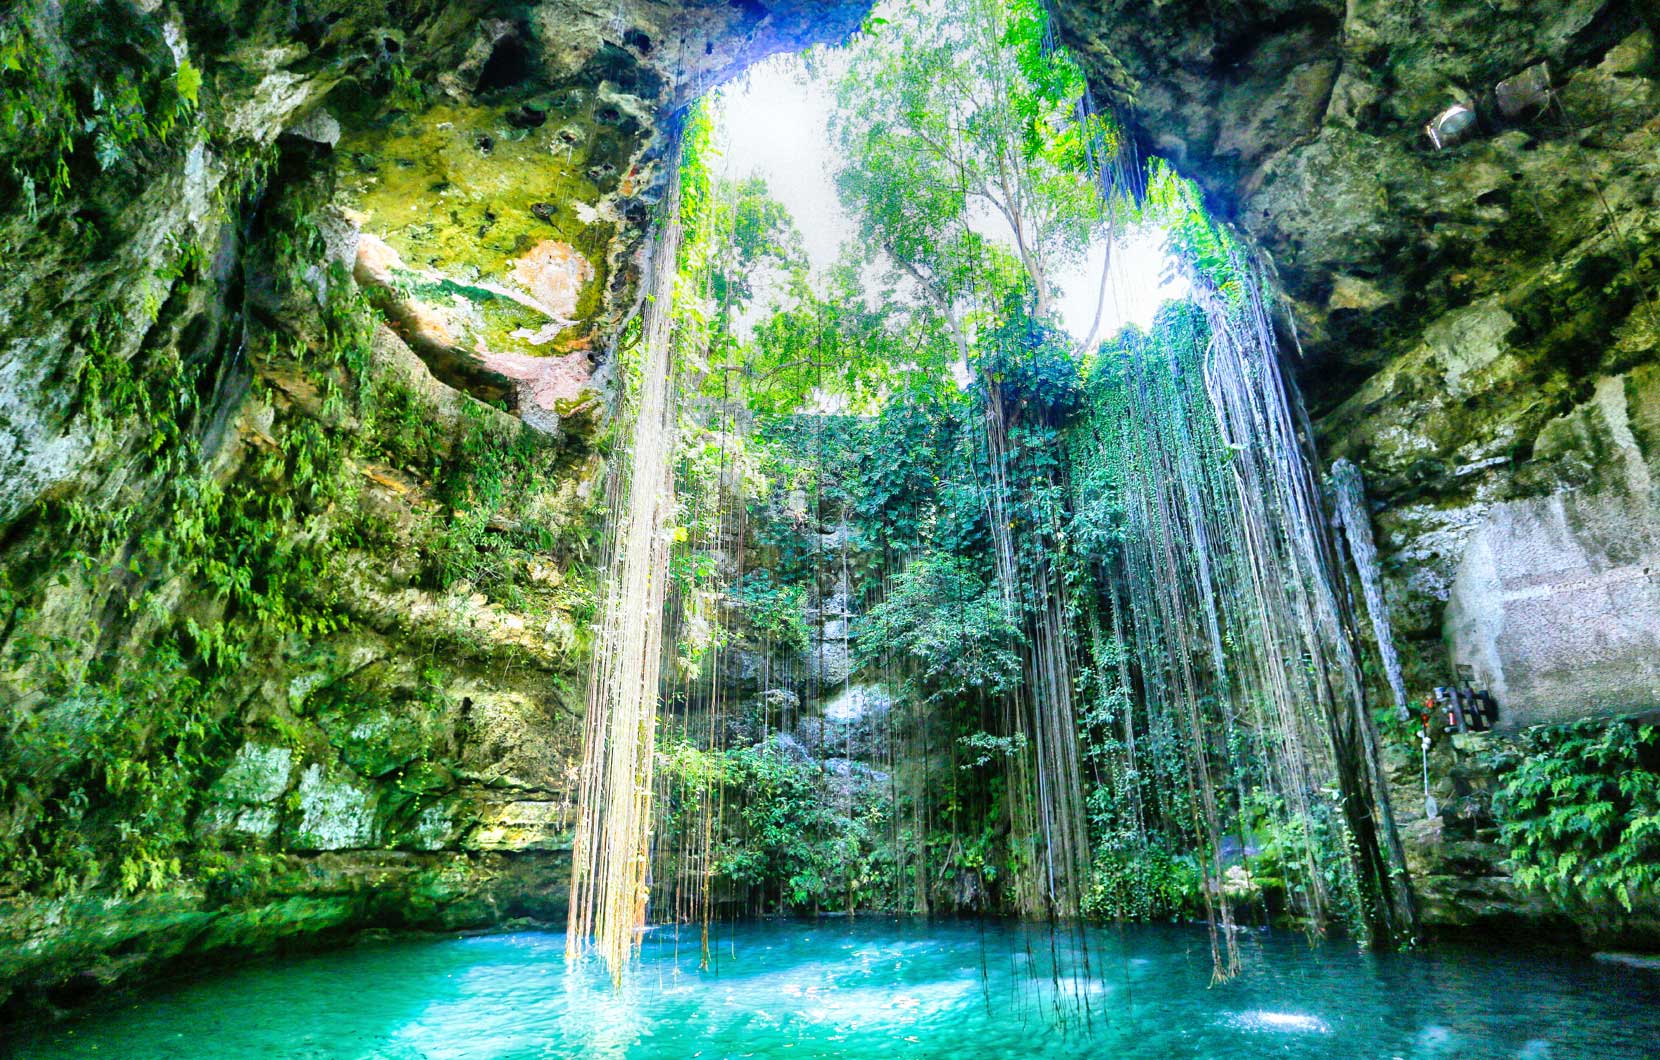 Over time the Yucatan peninsula's limestone foundation collapsed, leaving sinkholes filled with water—cenotes.